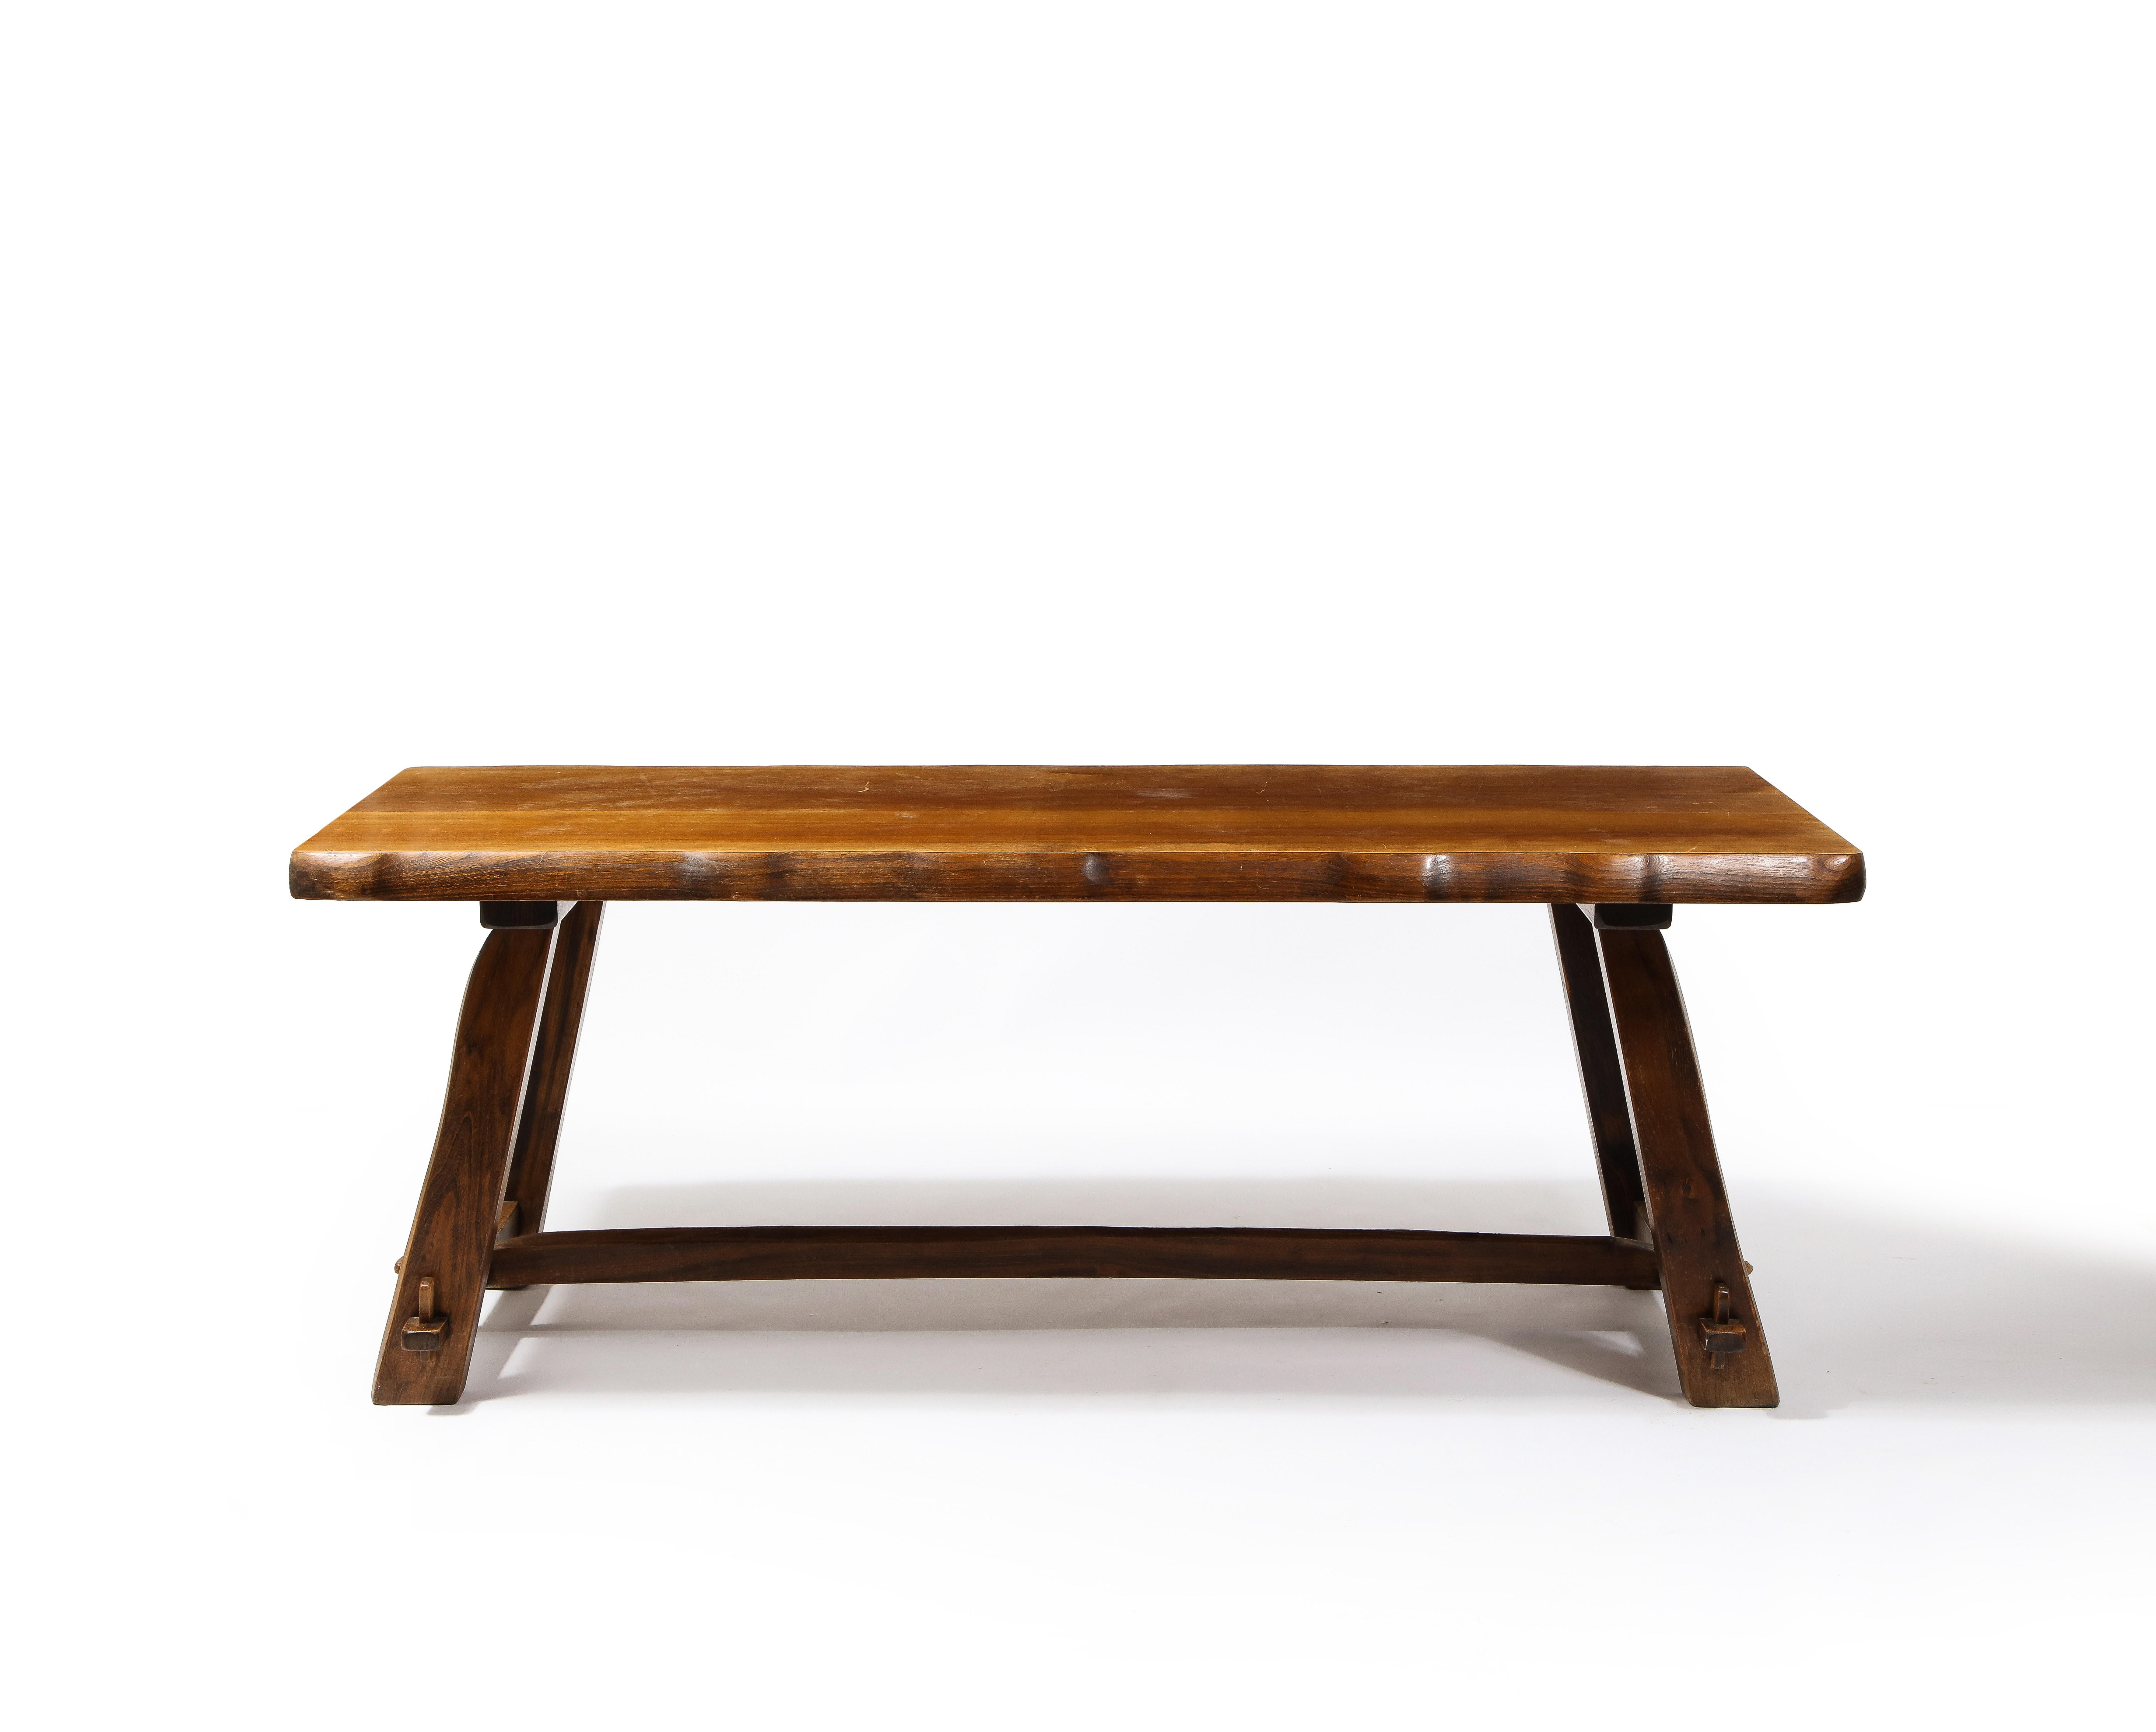 Solid elm table by Olavi Hanninen produced by Mikko Nupponen is entirely handmade of thick Elm. The top is a 4